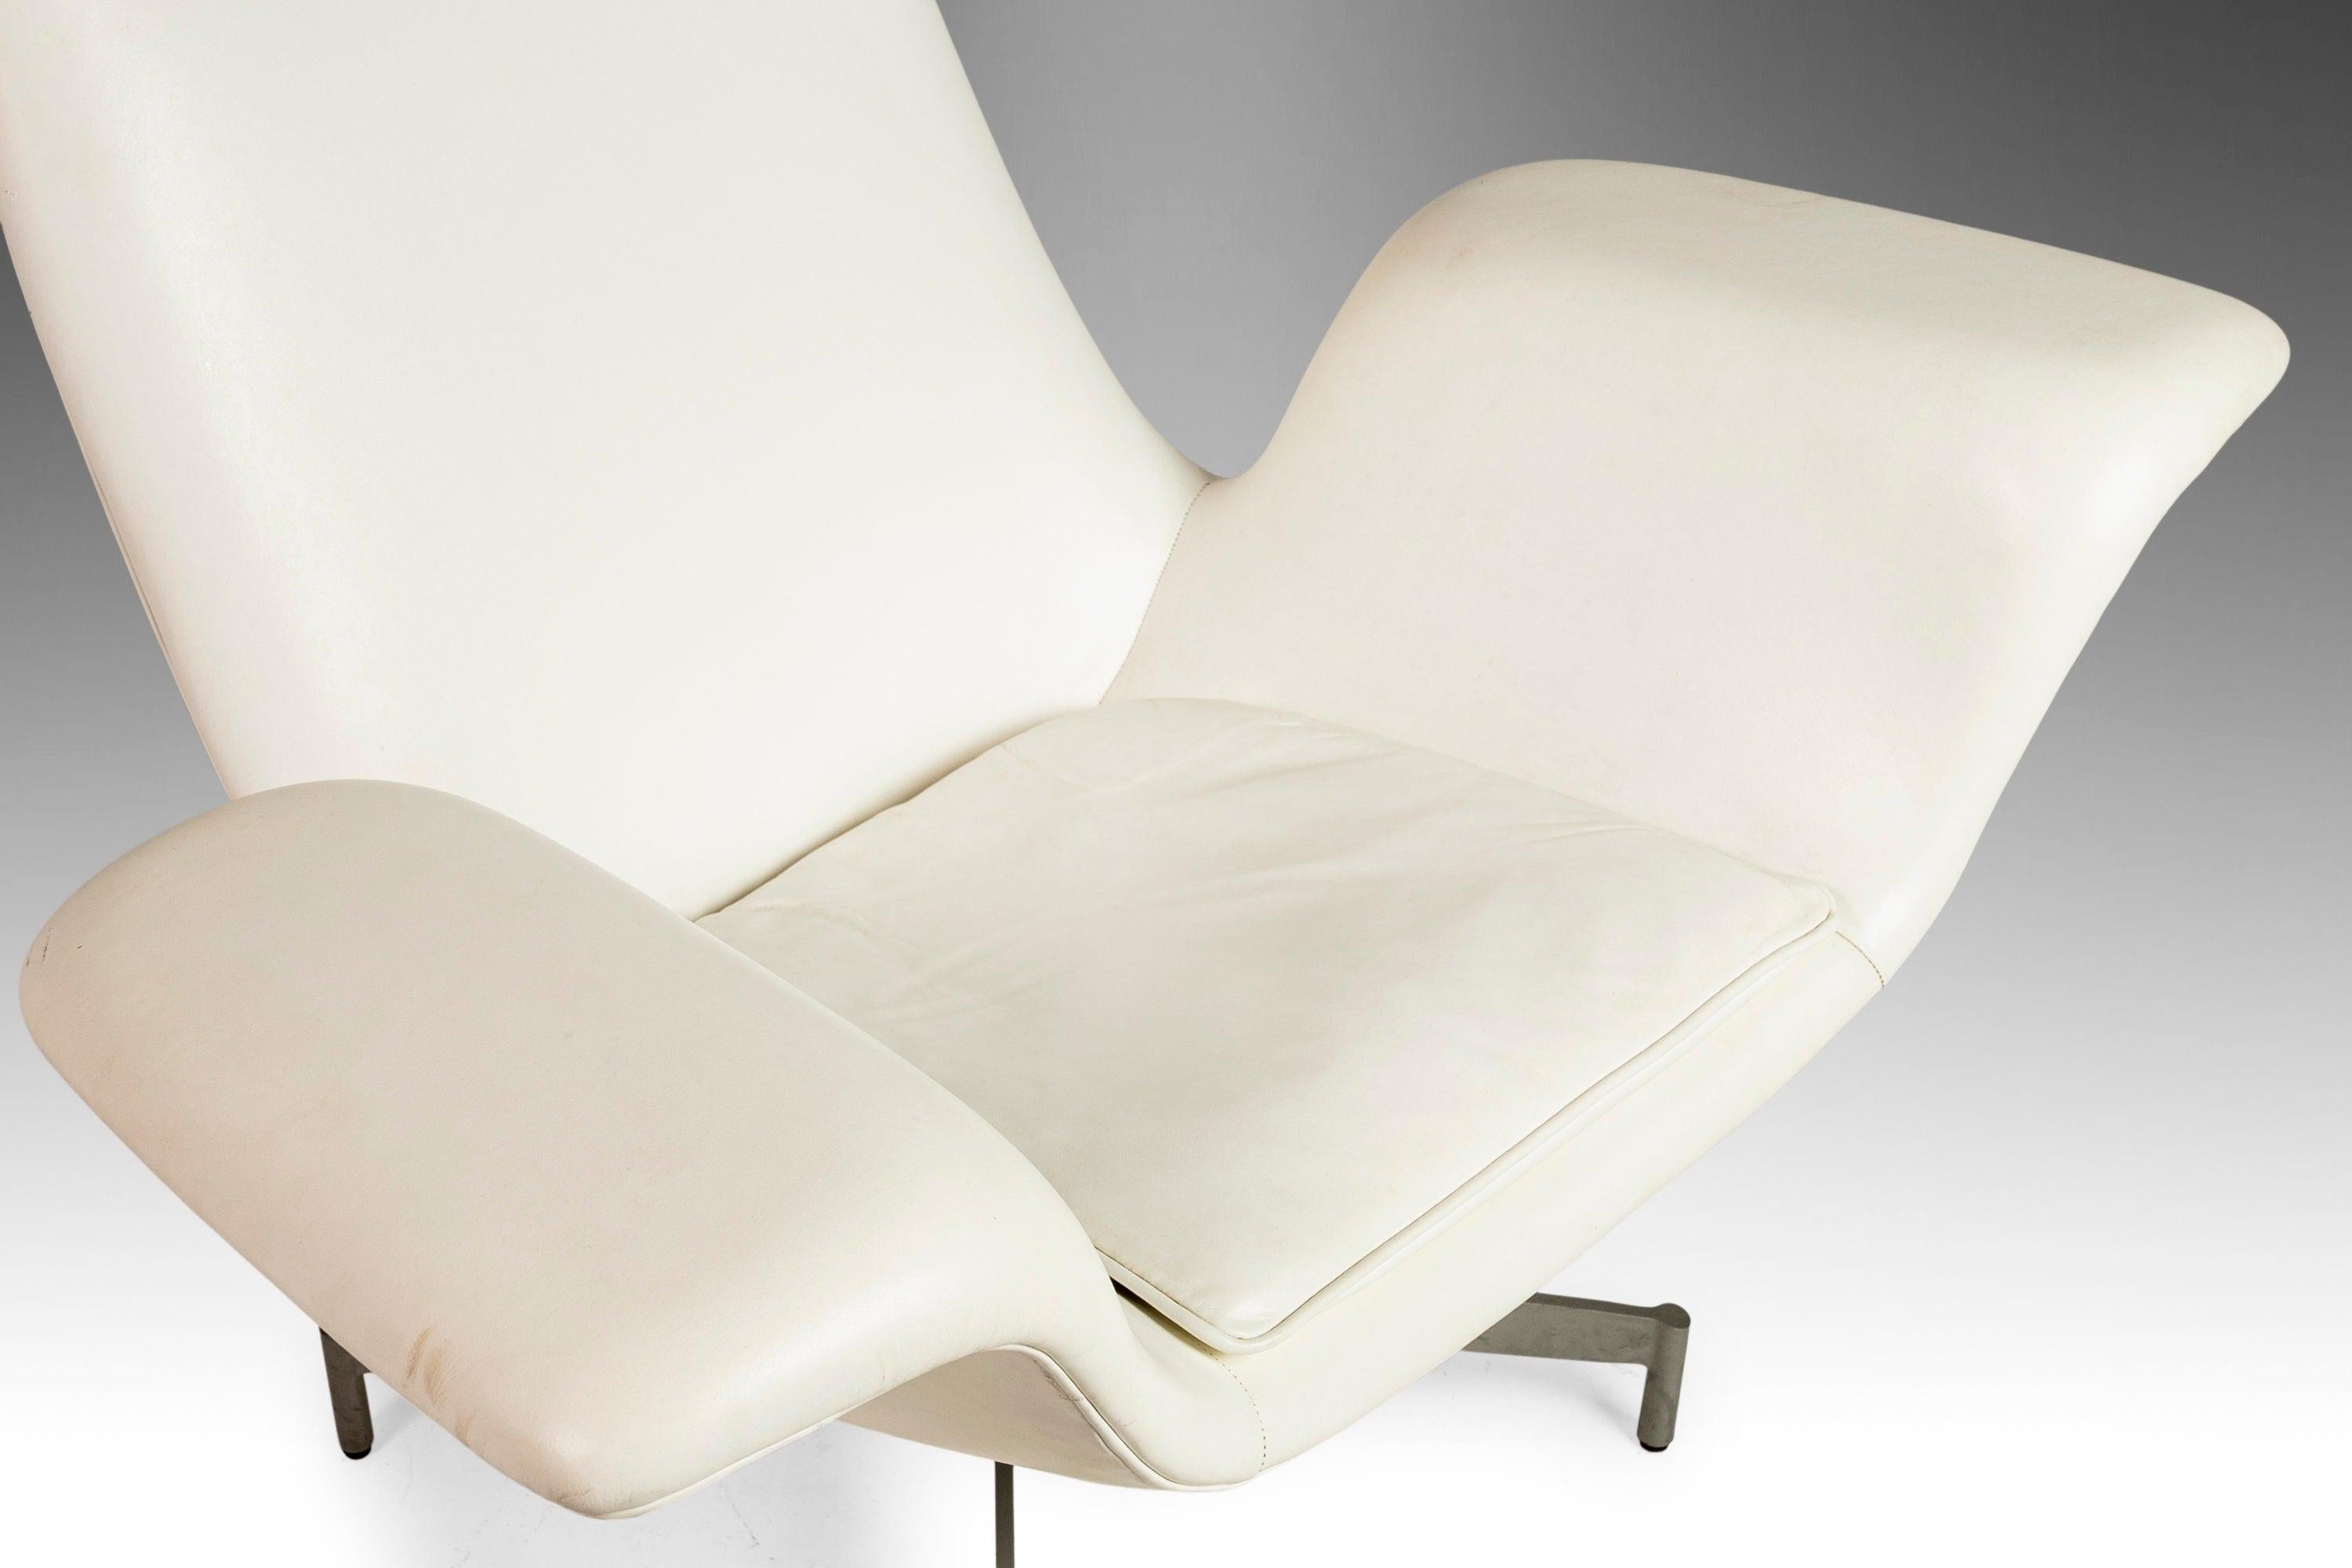 Vintage Dialogue Wing Lounge Chair by HBF in White Leather, c. 1990's For Sale 2